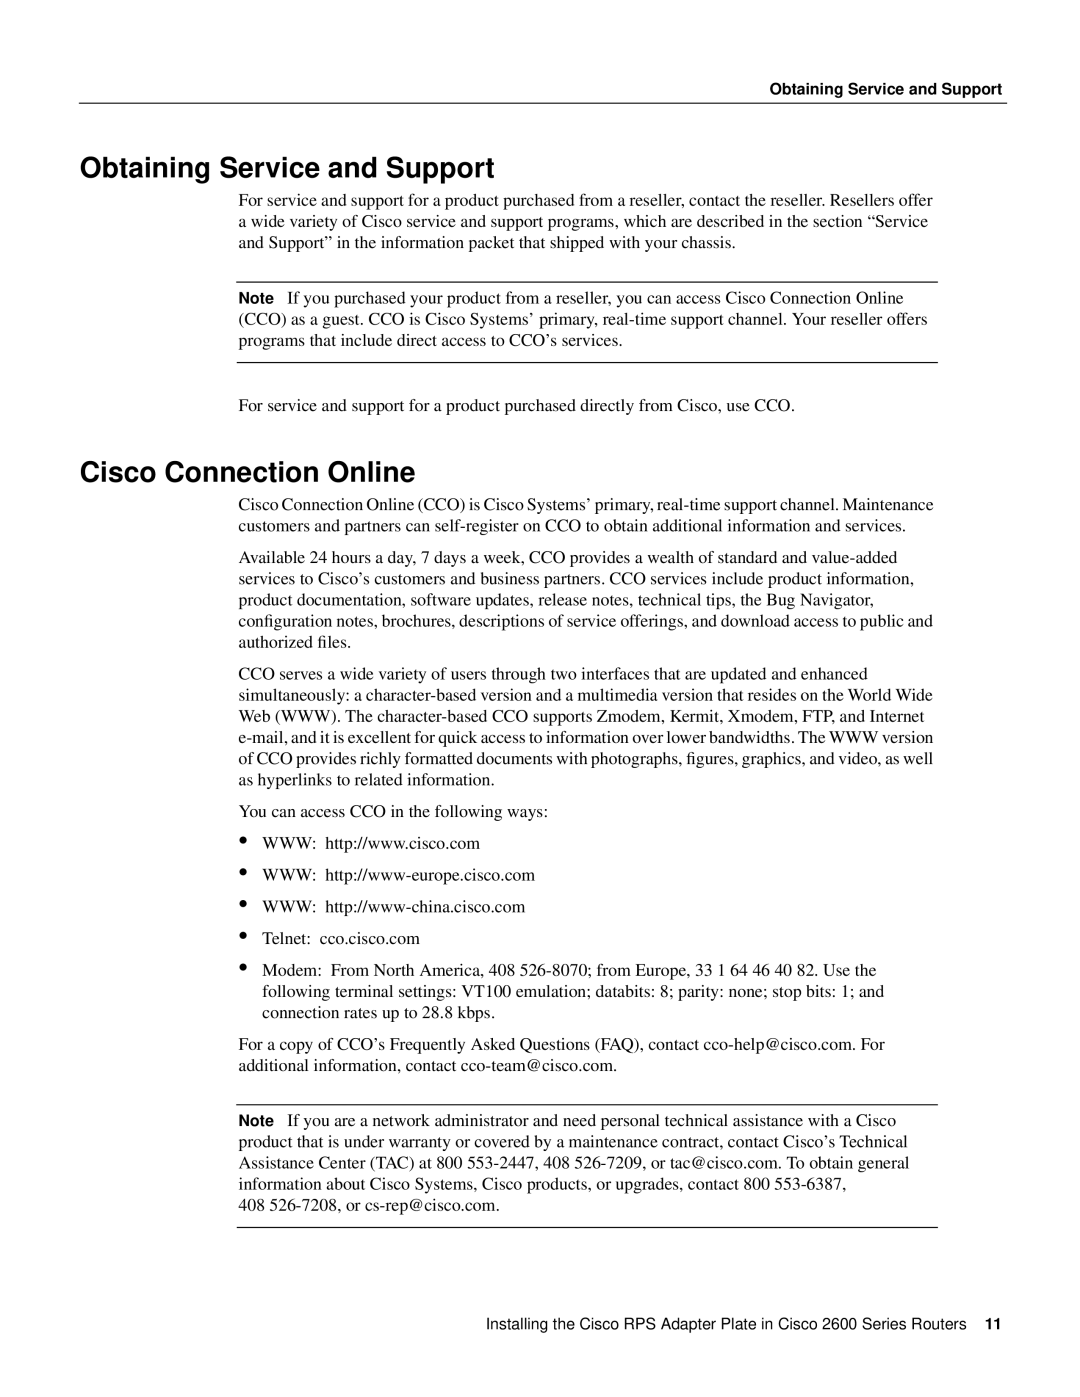 Cisco Systems 2600 Series manual Obtaining Service and Support, Cisco Connection Online 